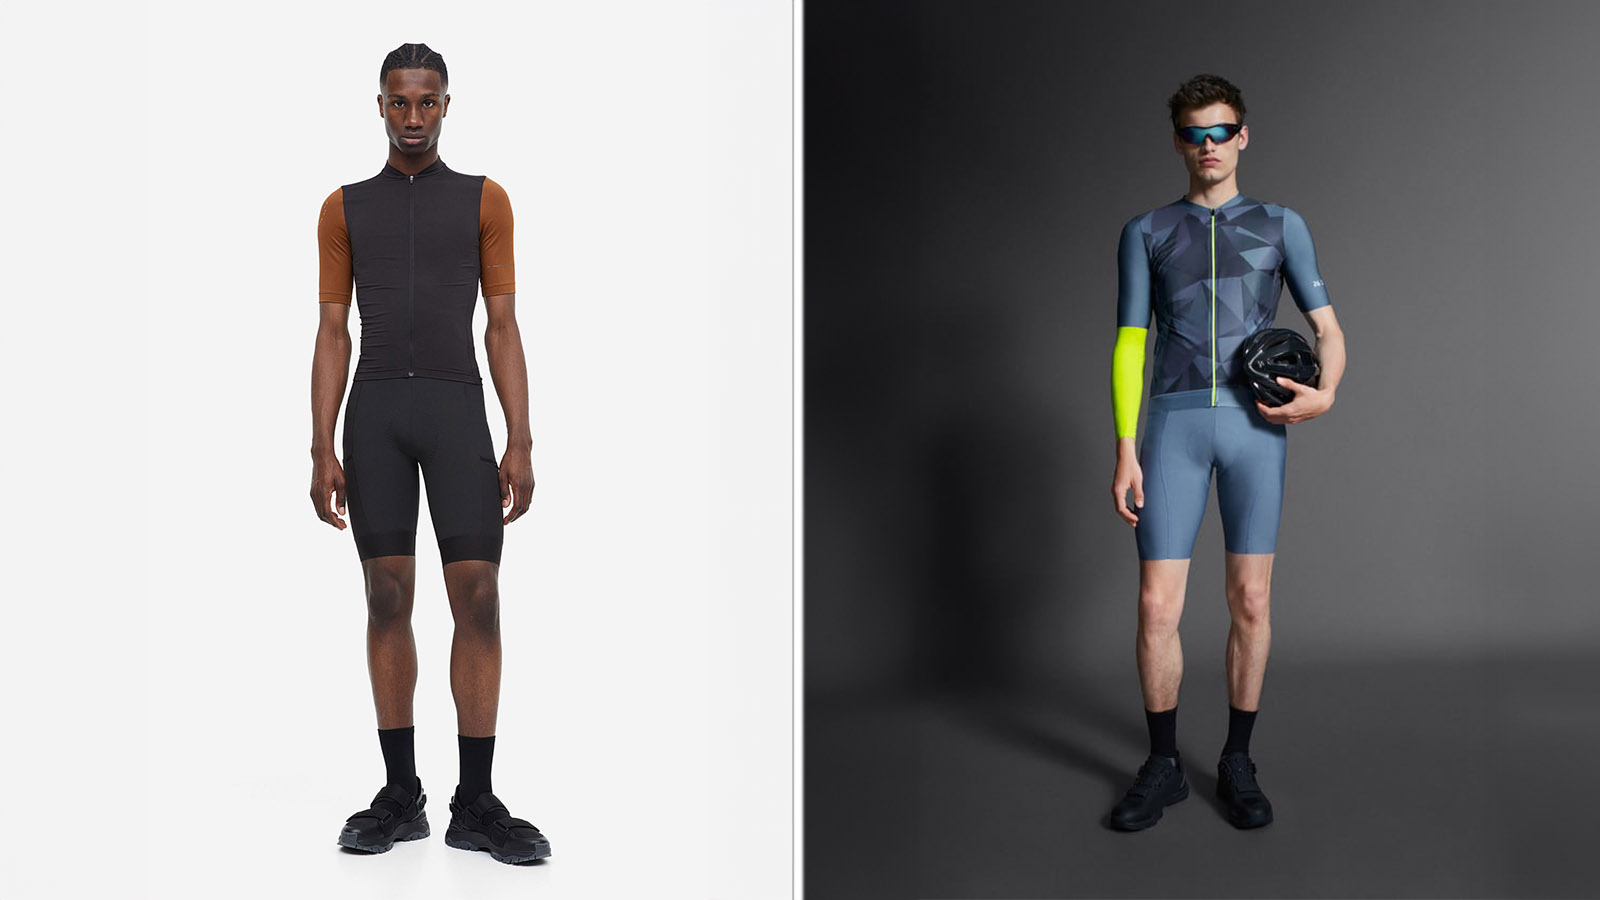 Fast Fashion is Coming for Cycling w/ Collections from Zara and H&M